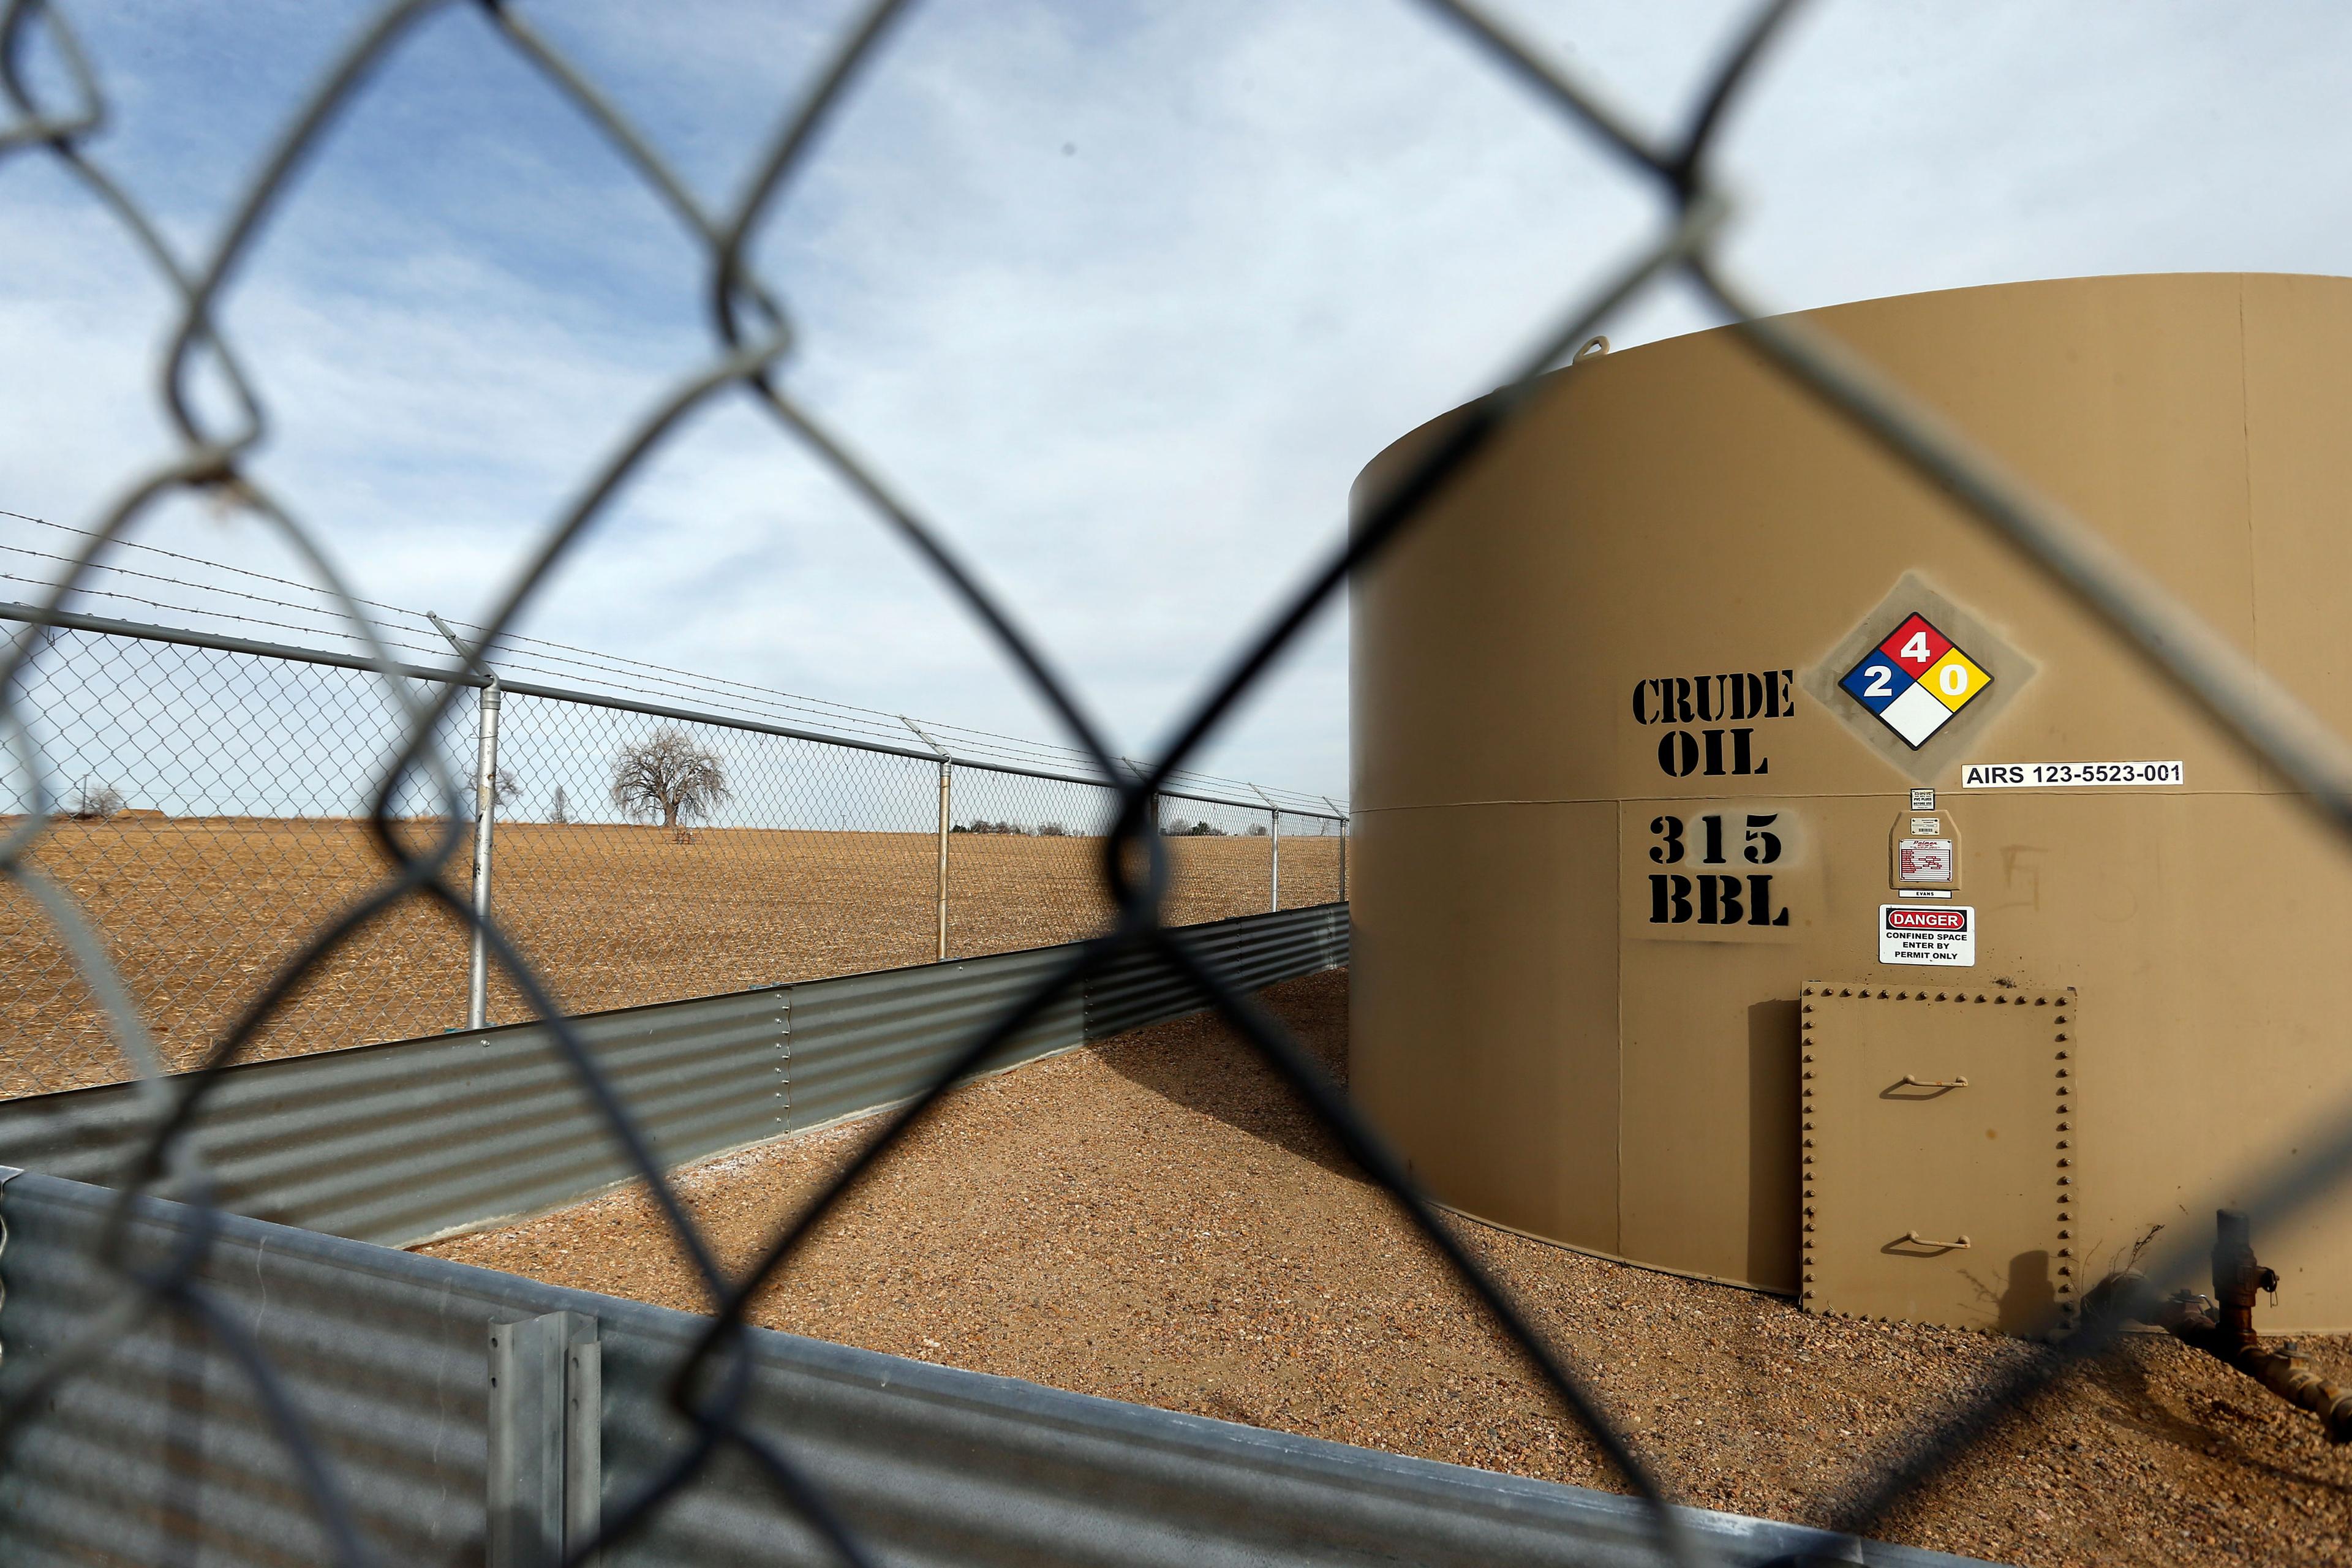 A crude oil storage tank sits behind a fence at a petroleum extraction site, in Weld County, near Mead, Colo., Monday, Feb. 13, 2017.